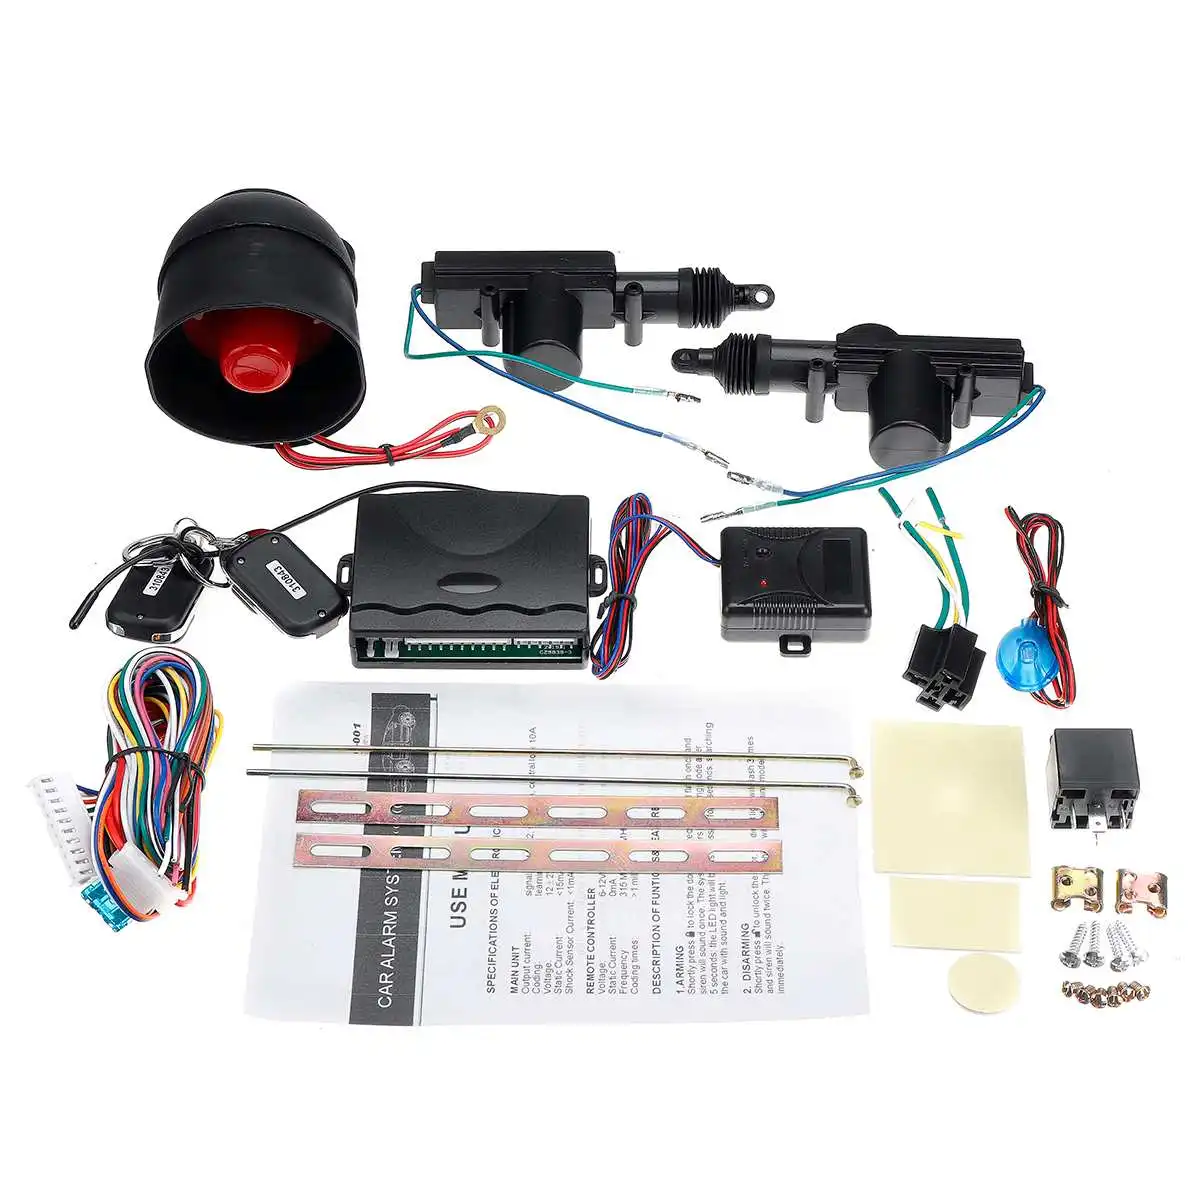 

12V Alarm Systems Car Auto Remote Central Kit Door Lock Locking Vehicle Keyless Entry System With Remote Controllers